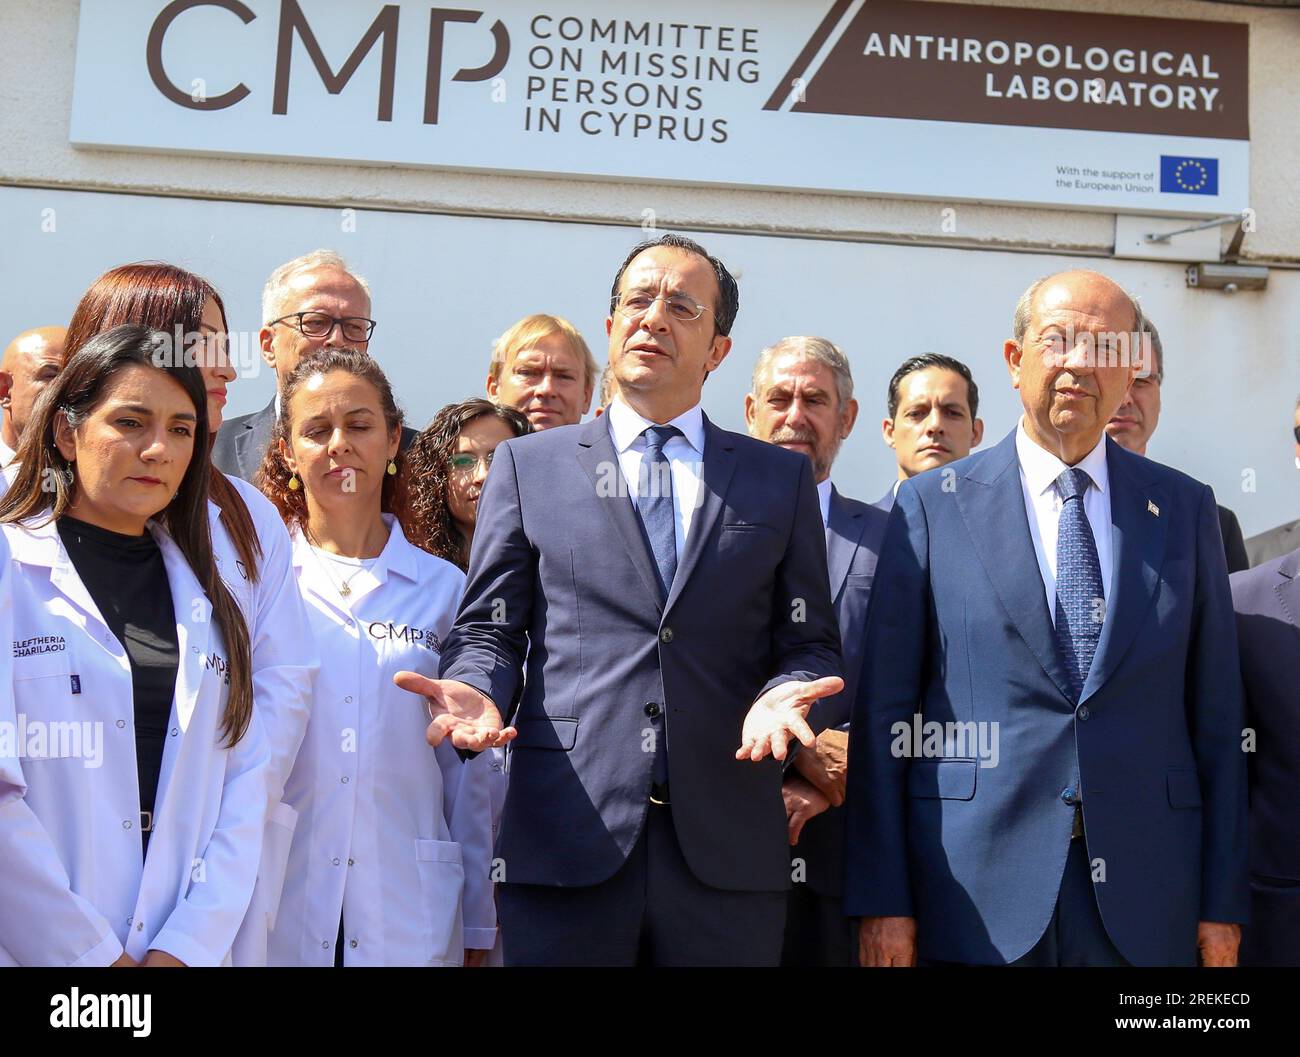 Nicosia, Cyprus. 28th July, 2023. Cyprus' President Nikos Christodoulides (2nd R, Front) and Turkish Cypriot leader Ersin Tatar (1st R, Front) visit the headquarters of the United Nations (UN)-led Committee on Missing Persons (CMP) in the old Nicosia airport complex in Nicosia, Cyprus, on July 28, 2023. Leaders of ethnically divided Cyprus held a meeting on Friday, jointly appealing to people to provide information that would help locate missing persons in conflicts, which date back almost to the establishment of the Cypriot state. Credit: George Christophorou/Xinhua/Alamy Live News Stock Photo